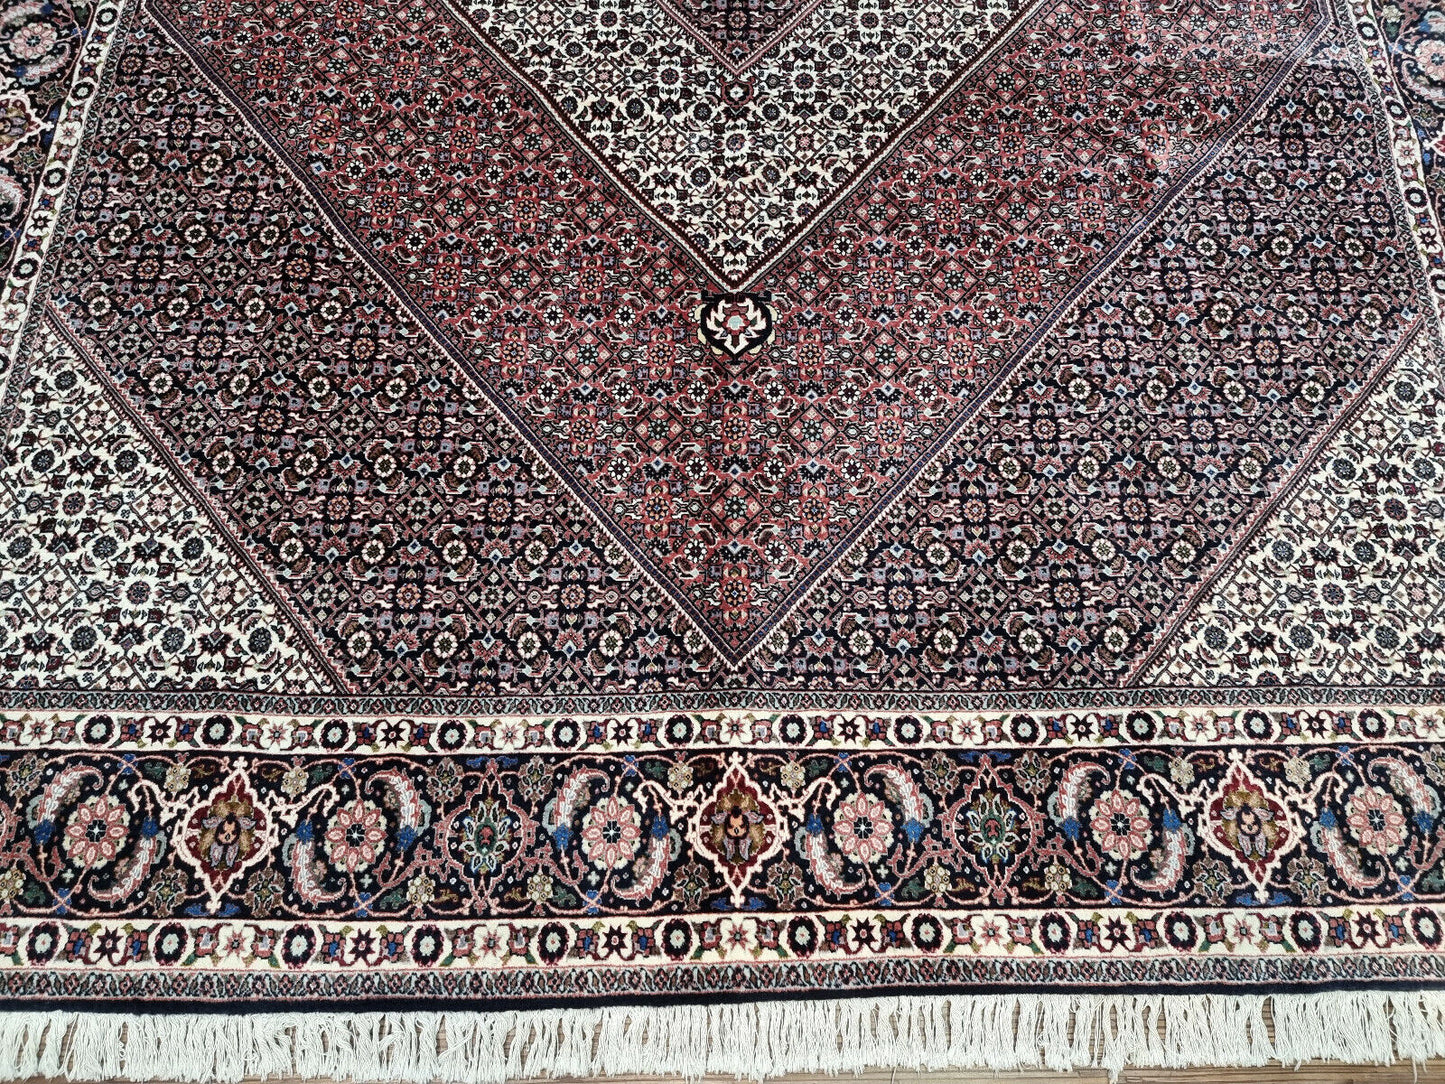 Close-up of geometric patterns on Handmade Vintage Persian Bidjar Rug - Detailed view highlighting the geometric designs integrated into the rug's borders.